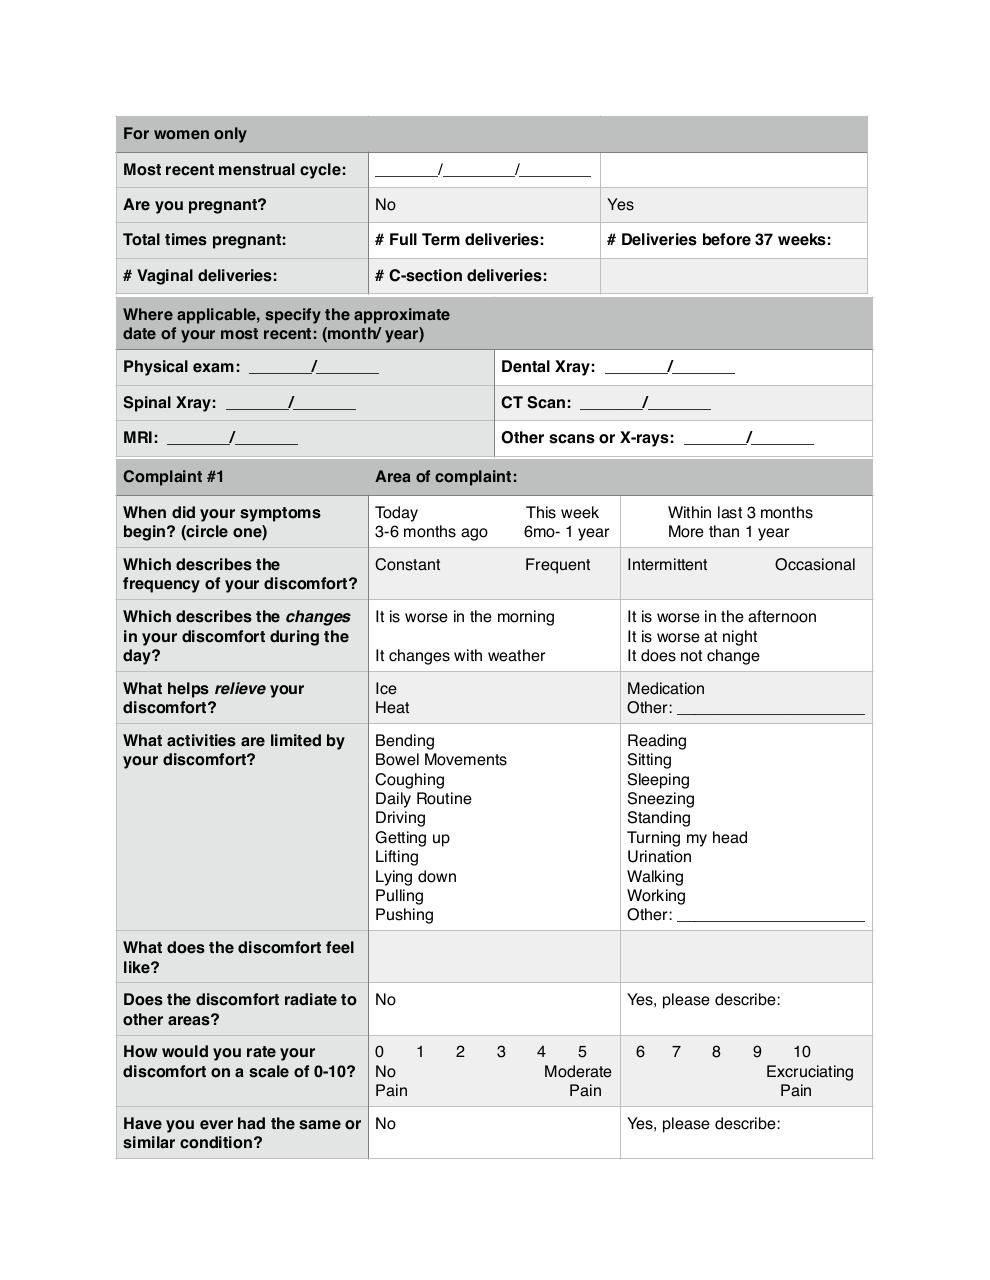 Preview of PDF document medina-family-chiropractic-acupuncture-new-patient-forms.pdf